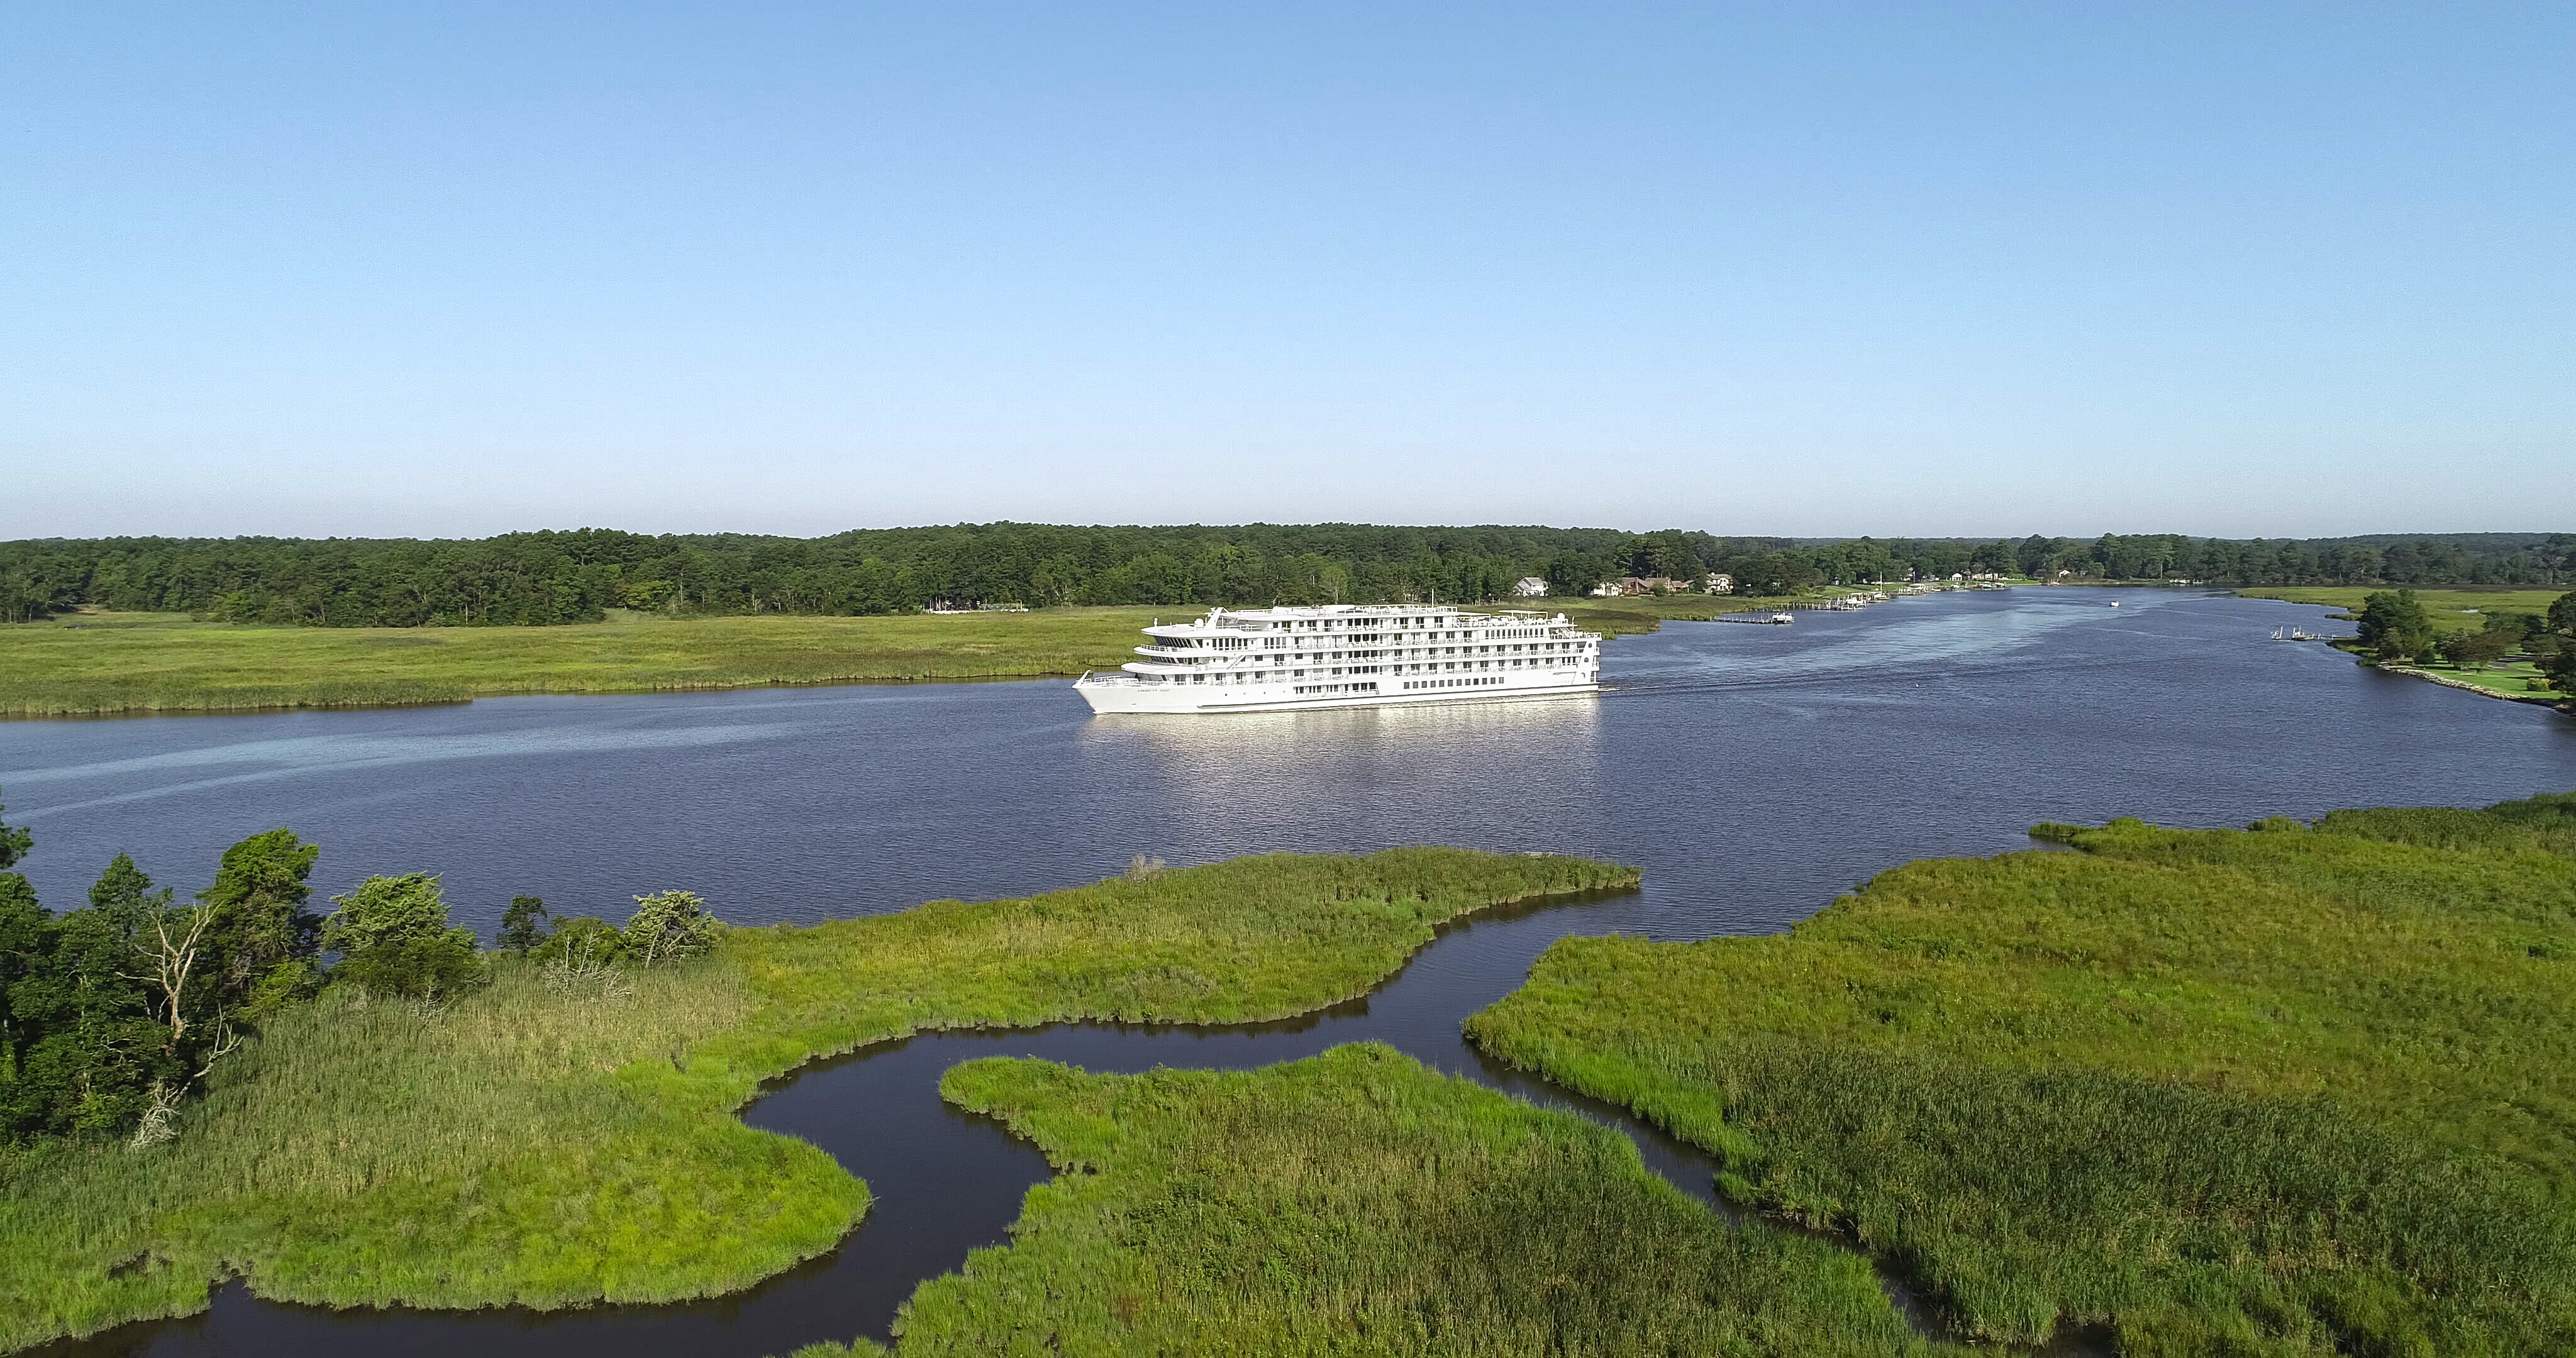 <p>Sail 1,393 miles through 10 states on a comprehensive exploration of the mighty Mississippi on the new <em>American Serenade</em>. Inaugurated in 2023, the 91-cabin <em>American Serenade</em> won Best New River Cruise Ship of the Year 2023 by <a href="https://www.cruisecritic.com/editors-picks/river/">Cruise Critic</a>, the first time an American ship has received this prestigious award.</p> <p>“With extra-large all-balcony staterooms and suites, trendy interior décor, an innovative hydraulic bow and retractable ramp, and one of the most gorgeous sun decks we’ve seen on a river-going ship, <em>American Serenade</em> sets the bar for domestic US river cruising high,” the award notes.</p> <p>The epic itinerary beginning July 18, 2024 includes 22 ports of call including Oak Alley, Houmas House, Baton Rouge, and St. Francisville in Louisiana; Natchez, Vicksburg, Greenville, and Tunica in Mississippi; Memphis in Tennessee; Cape Girardeau, St. Louis, and Hannibal in Missouri; Muscatine and Dubuque in Iowa; and Winona, Red Wing, and <a href="https://www.cntraveler.com/story/st-paul-hmong-village?mbid=synd_msn_rss&utm_source=msn&utm_medium=syndication">Saint Paul</a> in Minnesota.</p> <div class="callout"><p><a href="https://cna.st/affiliate-link/4HmUvV4RQZcDjGPLEcNxjMDojmuWbRfXAD8GTBCFmPExmeRQCA8MXsdaBTUT8N21YiU3ANPSk3uonntg9KMjk3J1rUcJPxxo9dofyWXfxMioDjJoHJZ9EzkdVMNLZ9TUgS5KpFhKQQ1qJ6twfT3pFi4SpZqEd6GfqVeETDRnbMdGs4W6pT74bZ7CprzLHtkUu5BytRHULZVNDmTVL79M3zVBU1jzzzwCCAd" rel="sponsored" title="Book with American Cruise Lines">Book with American Cruise Lines</a></p> </div><p>Sign up to receive the latest news, expert tips, and inspiration on all things travel</p><a href="https://www.cntraveler.com/newsletter/the-daily?sourceCode=msnsend">Inspire Me</a>